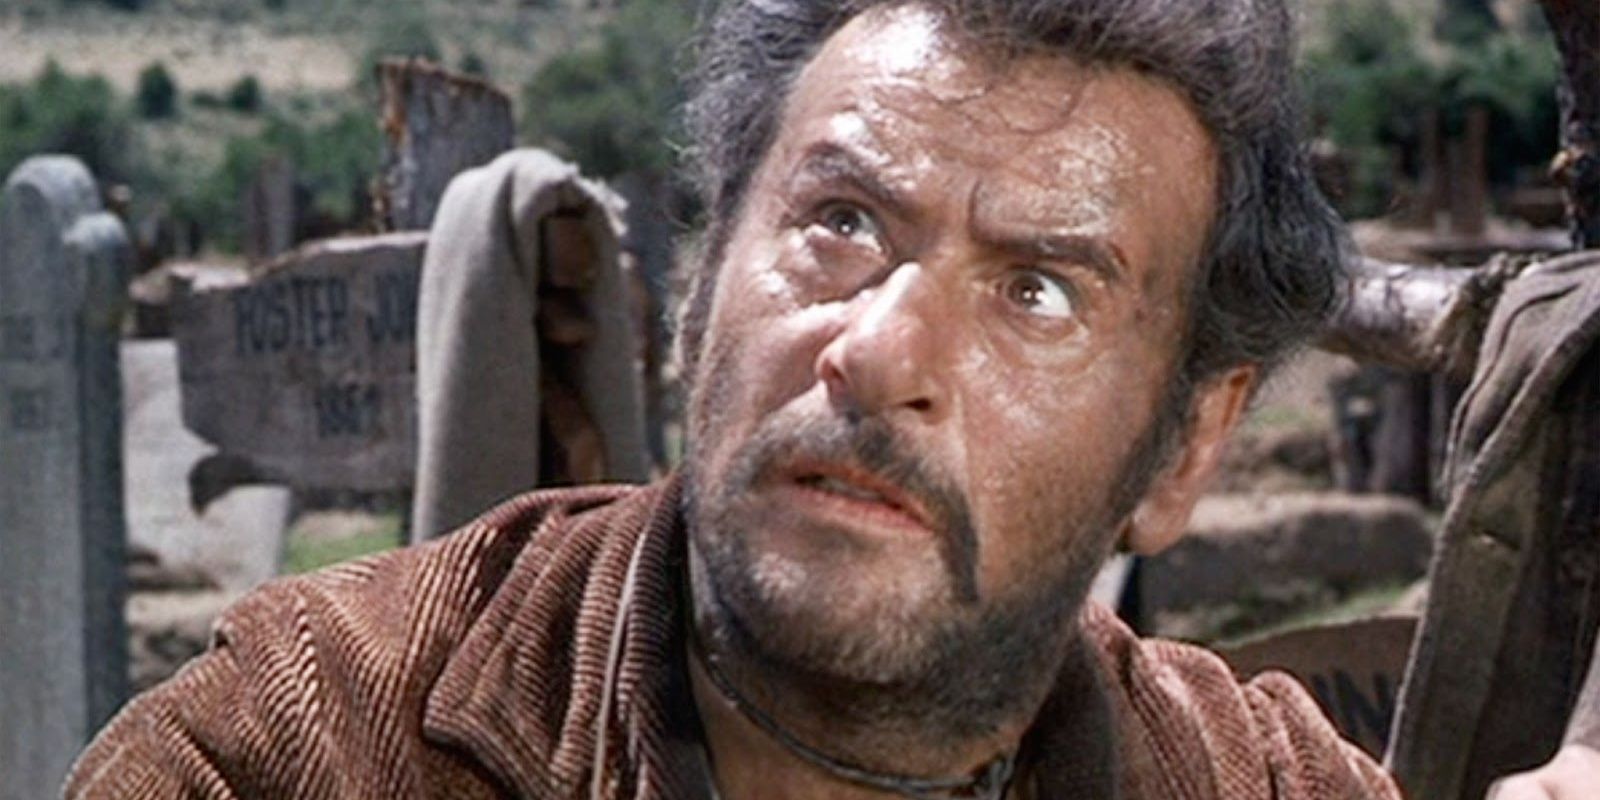 Tuco glowers up at Blondie in The Good the Bad and the Ugly